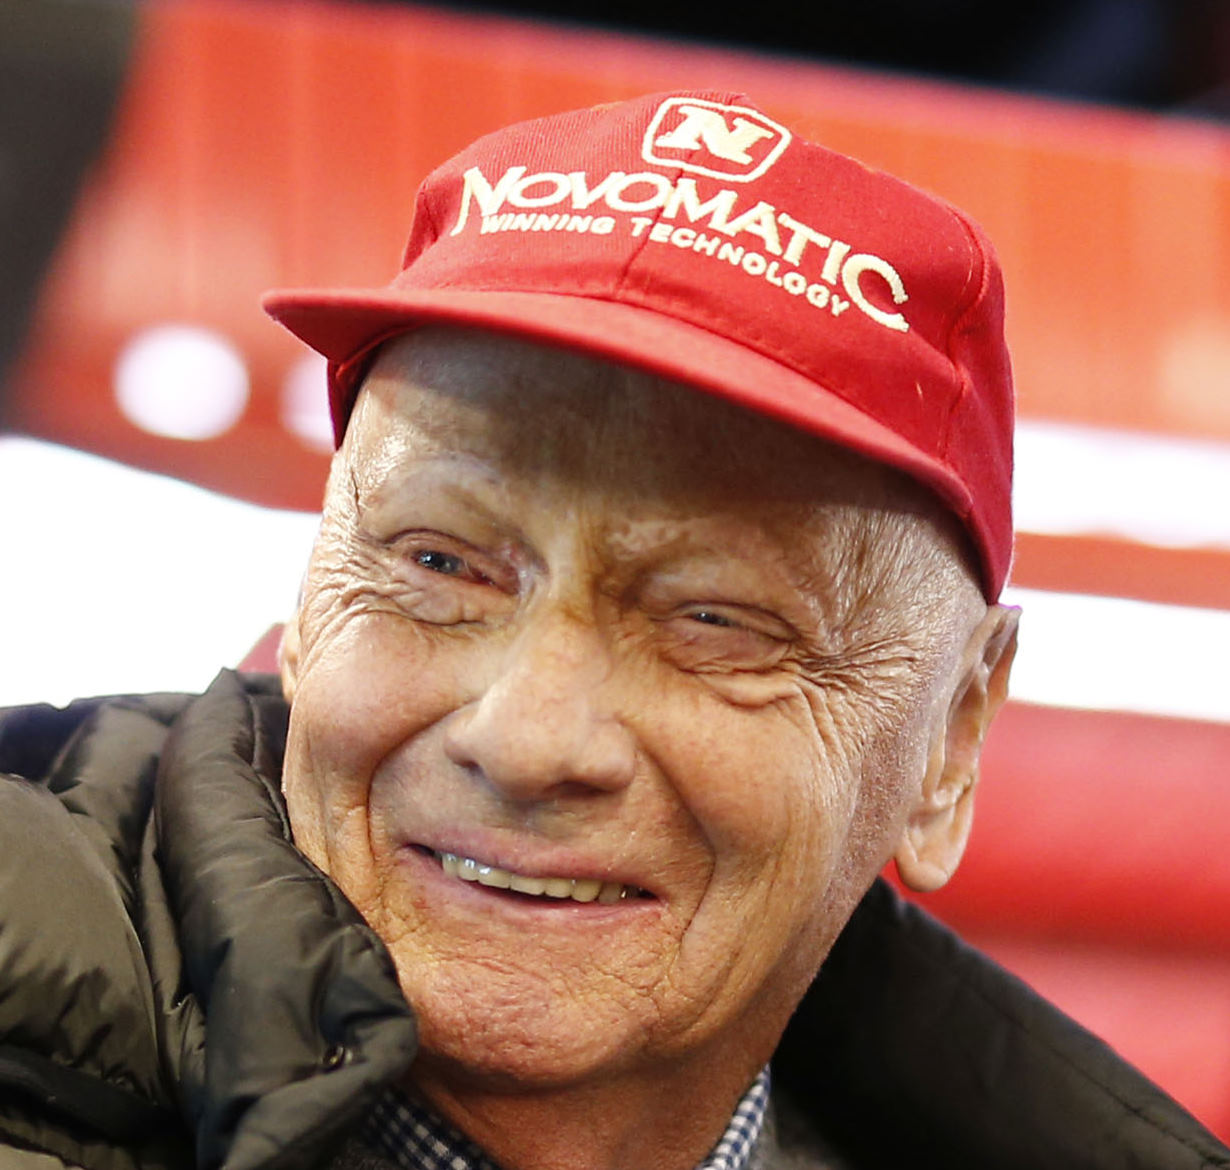 Lauda confirmed: "We have offered to go back and look calmly at a new system that allows Bernie's objectives to be achieved."